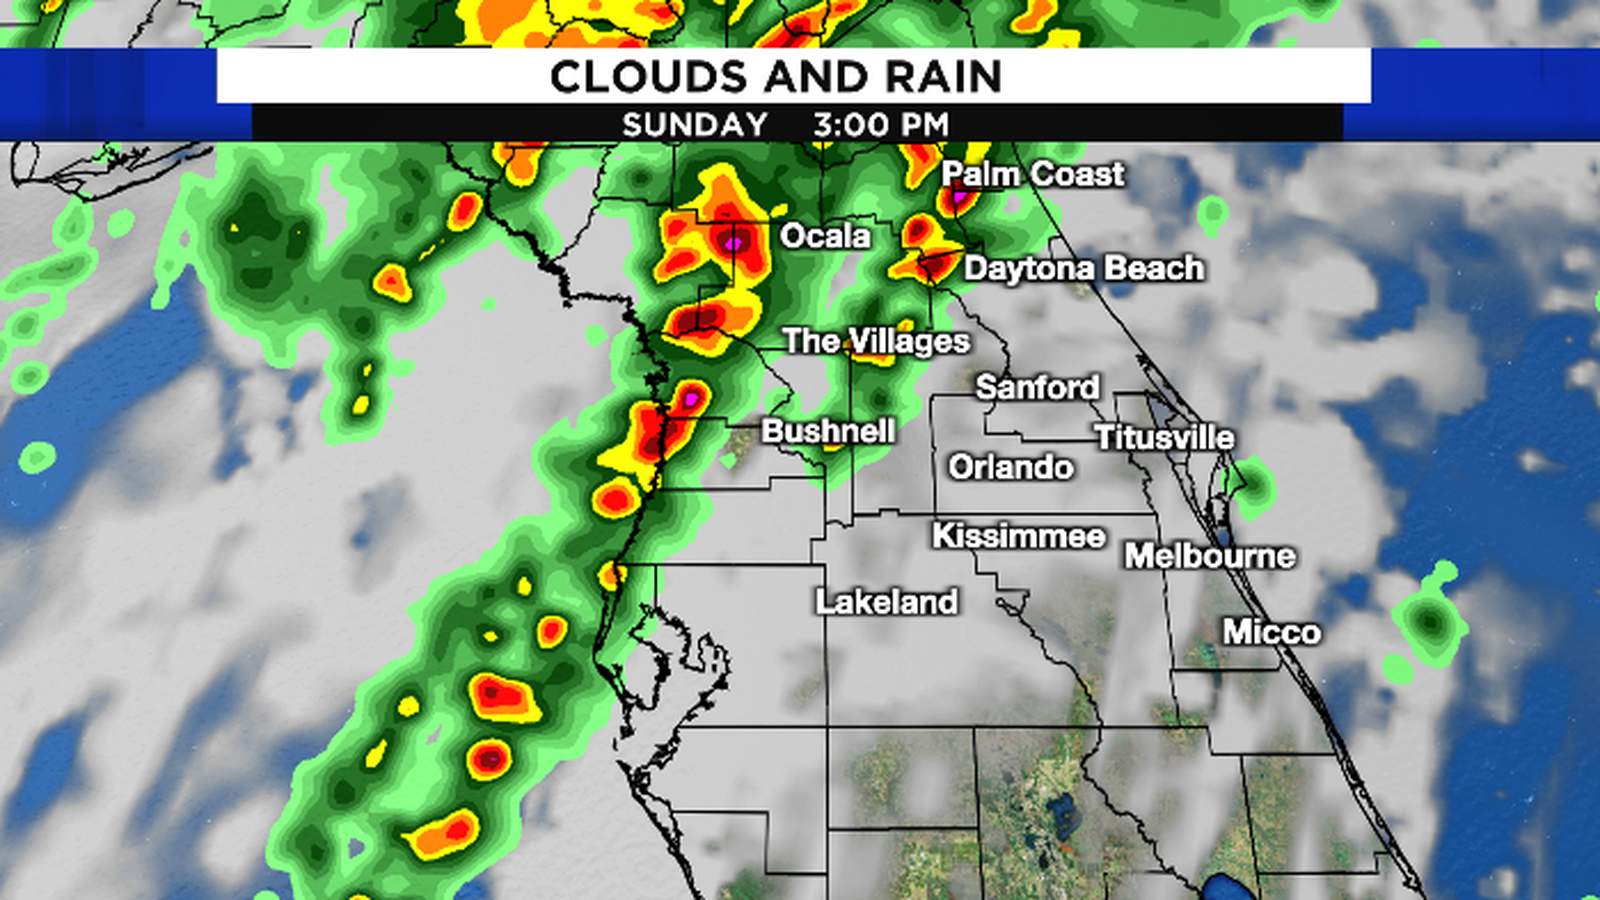 More waves of rain expected Sunday, few strong storms possible